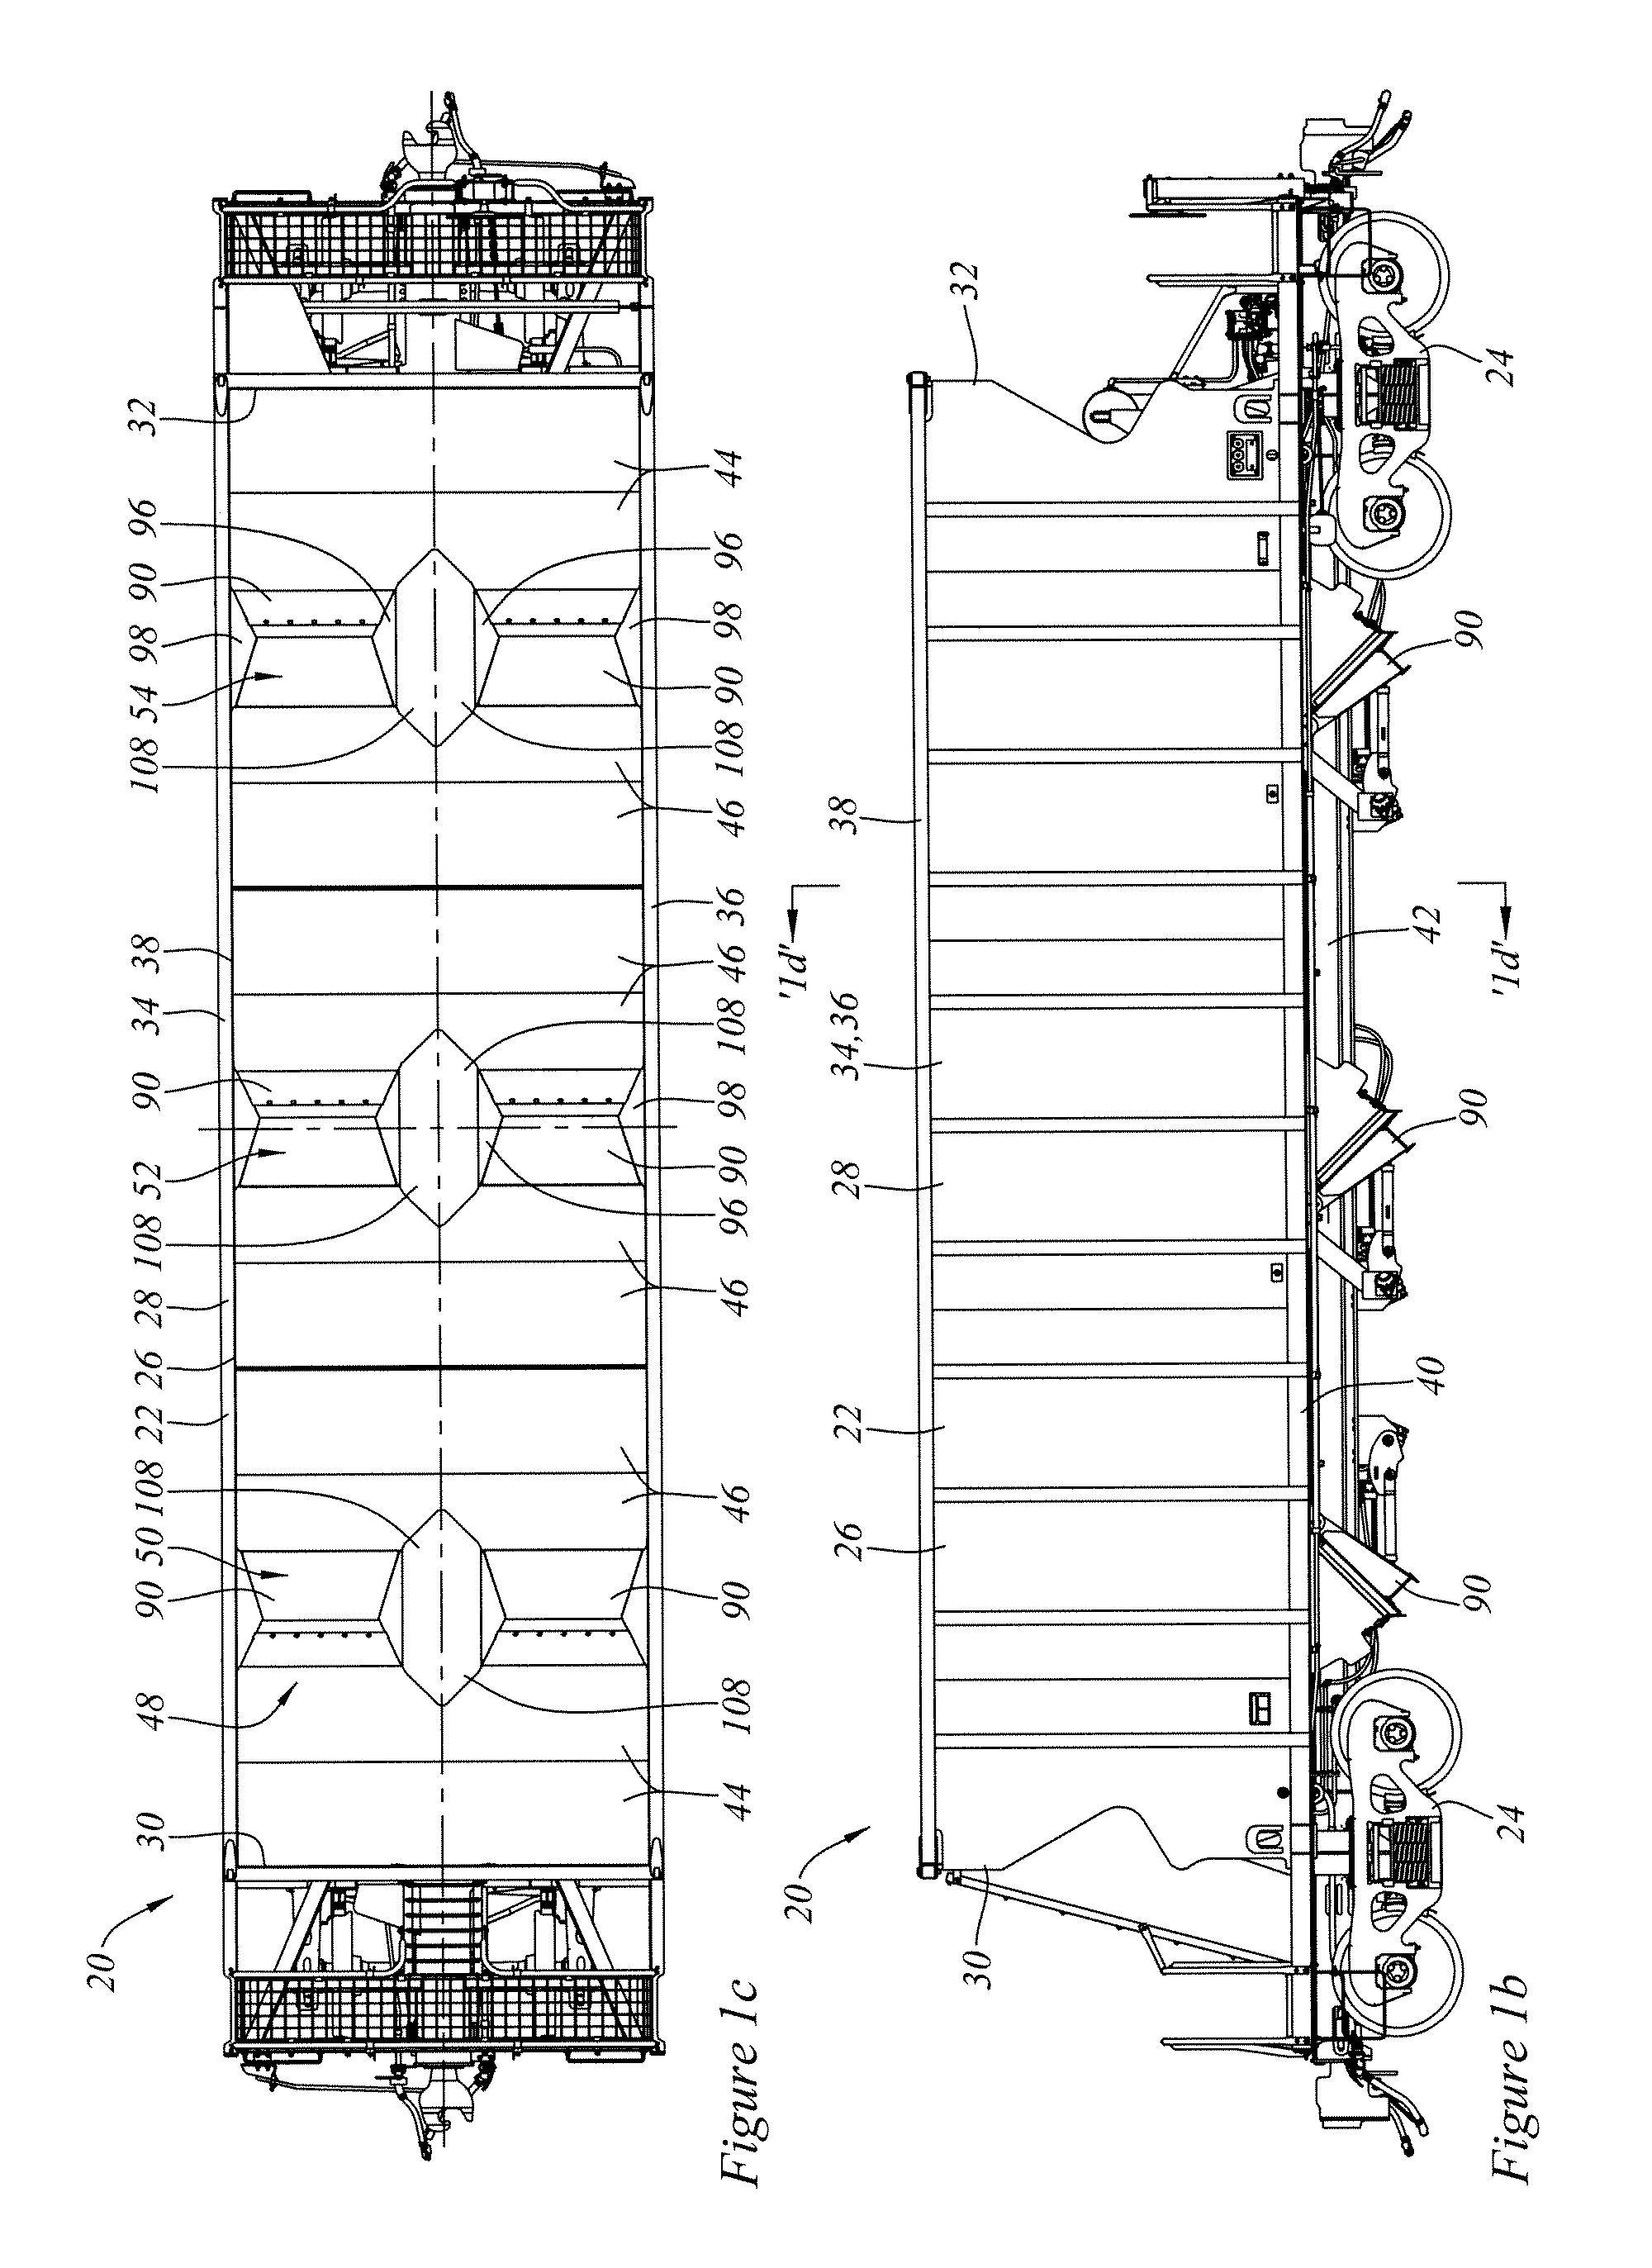 Rail road hopper car fittings and method of operation